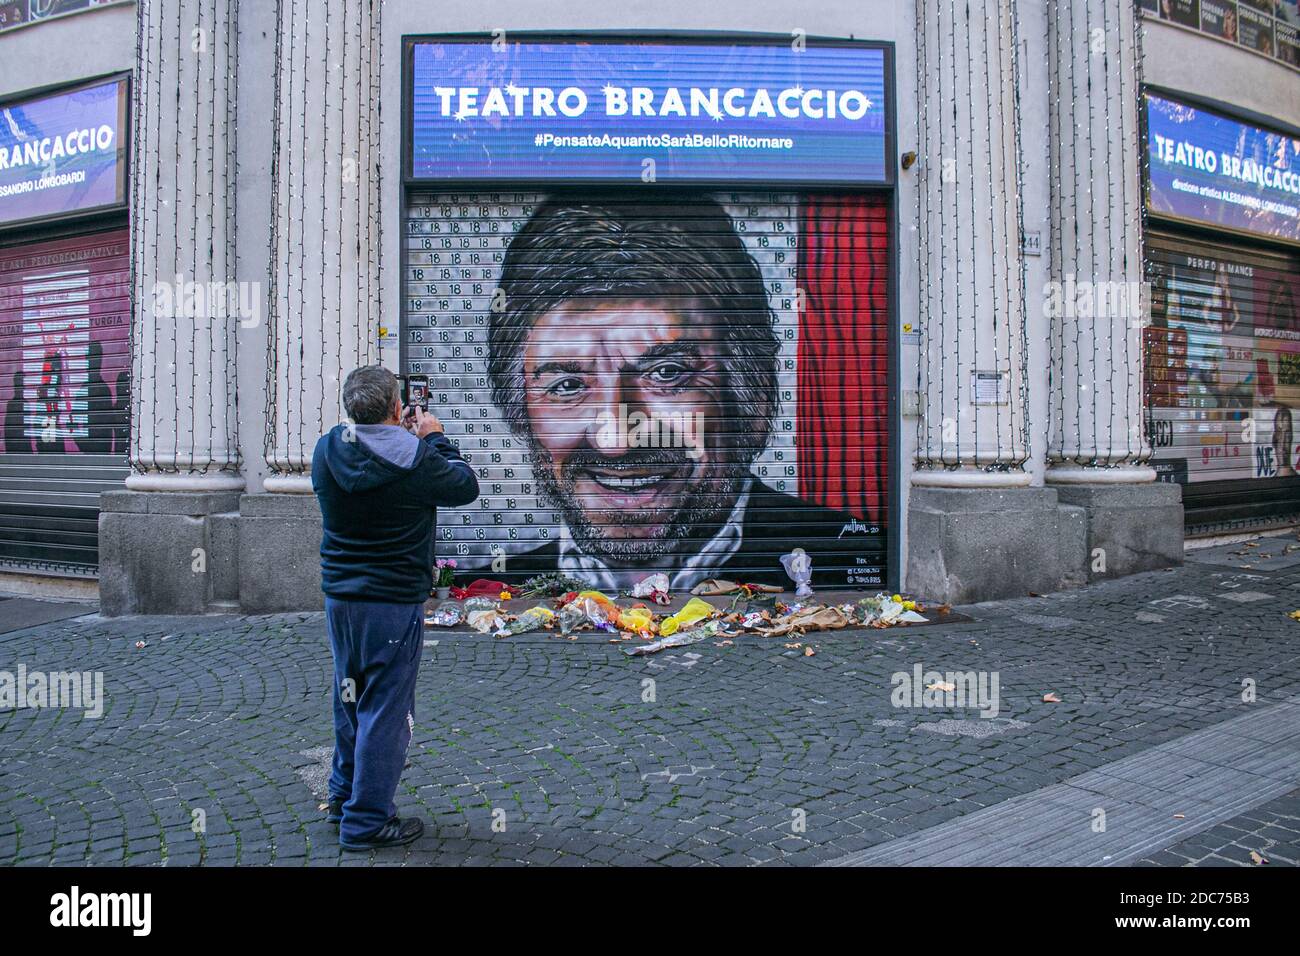 ROME ITALY  19 November 2020. The portrait  image of Luigi Gigi Proietti  who died on 2 November  created by The street artist Maupal appears on  the shutters of the Brancaccio Theater in Rome where the Italian actor and comedian  was artistic director from 2001 to 2007. Credit: amer ghazzal/Alamy Live News Stock Photo